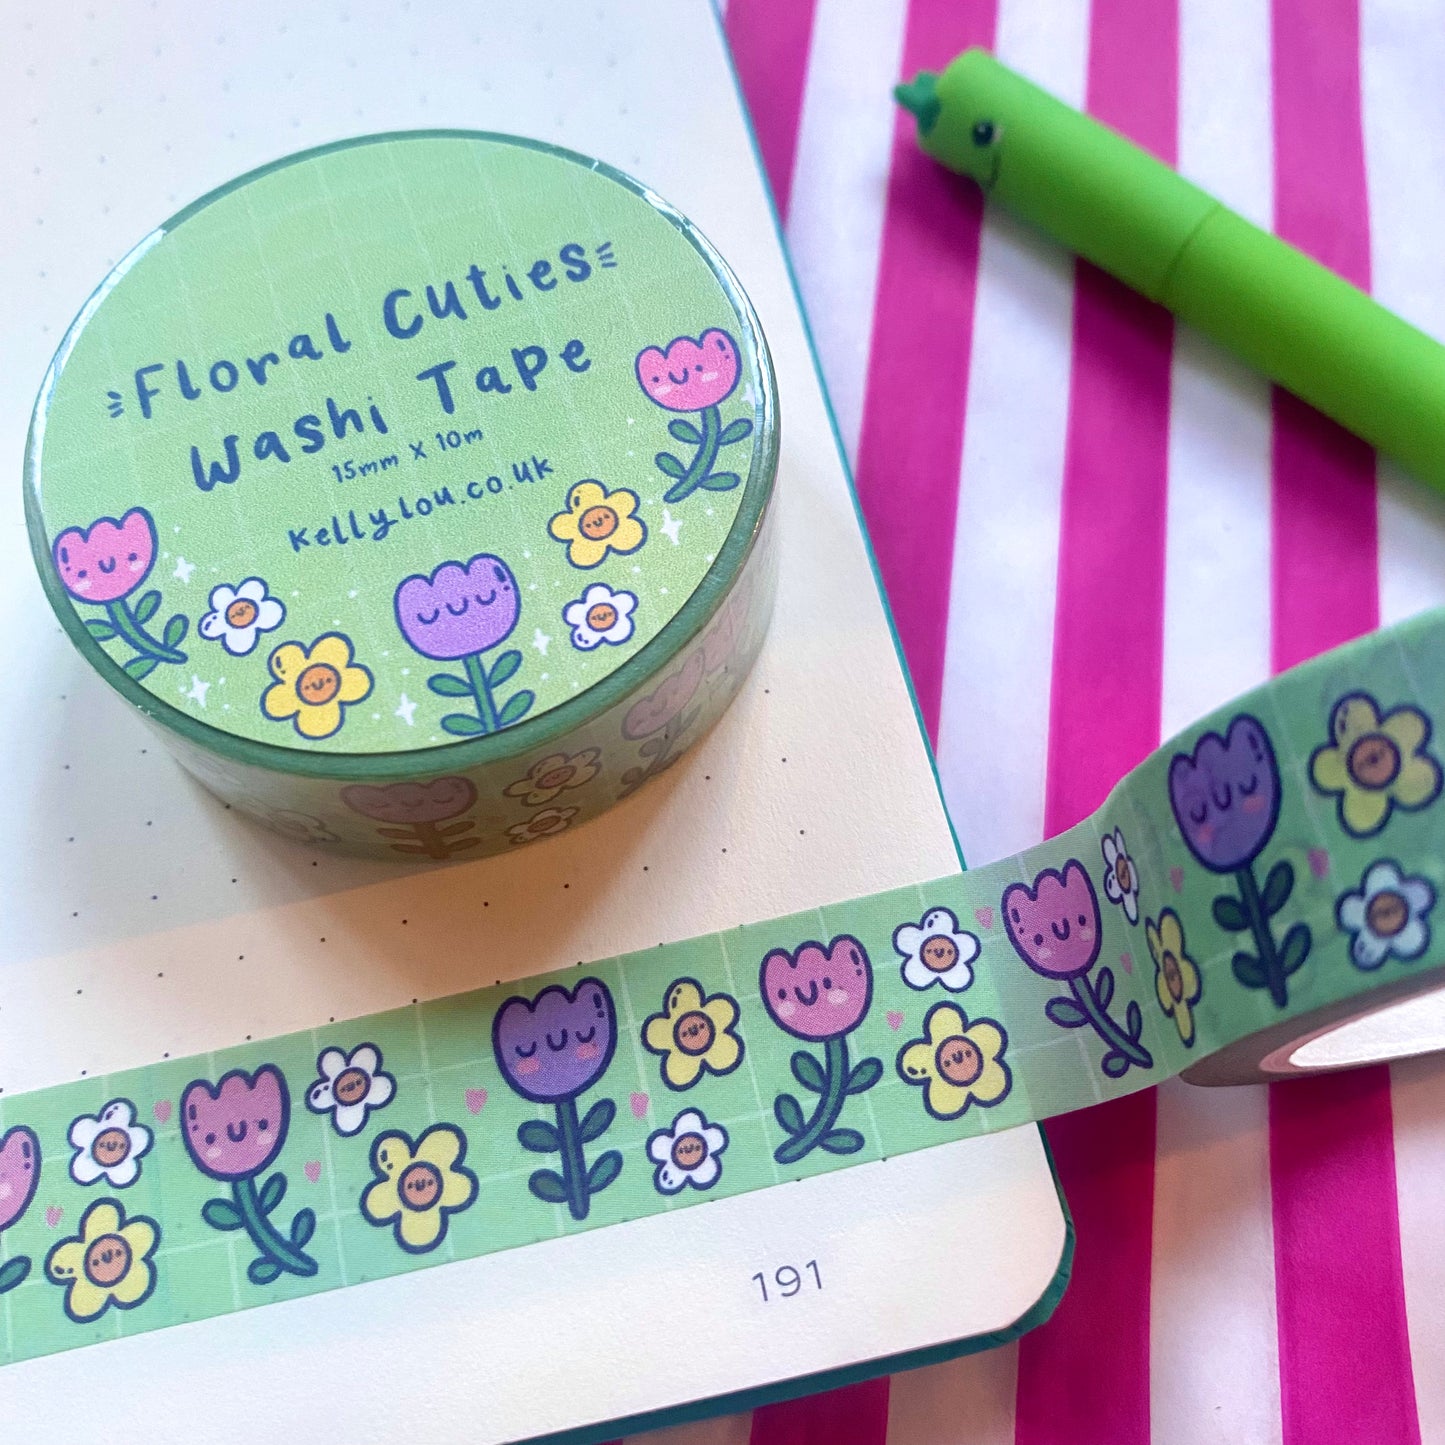 Floral Cuties Washi Tape